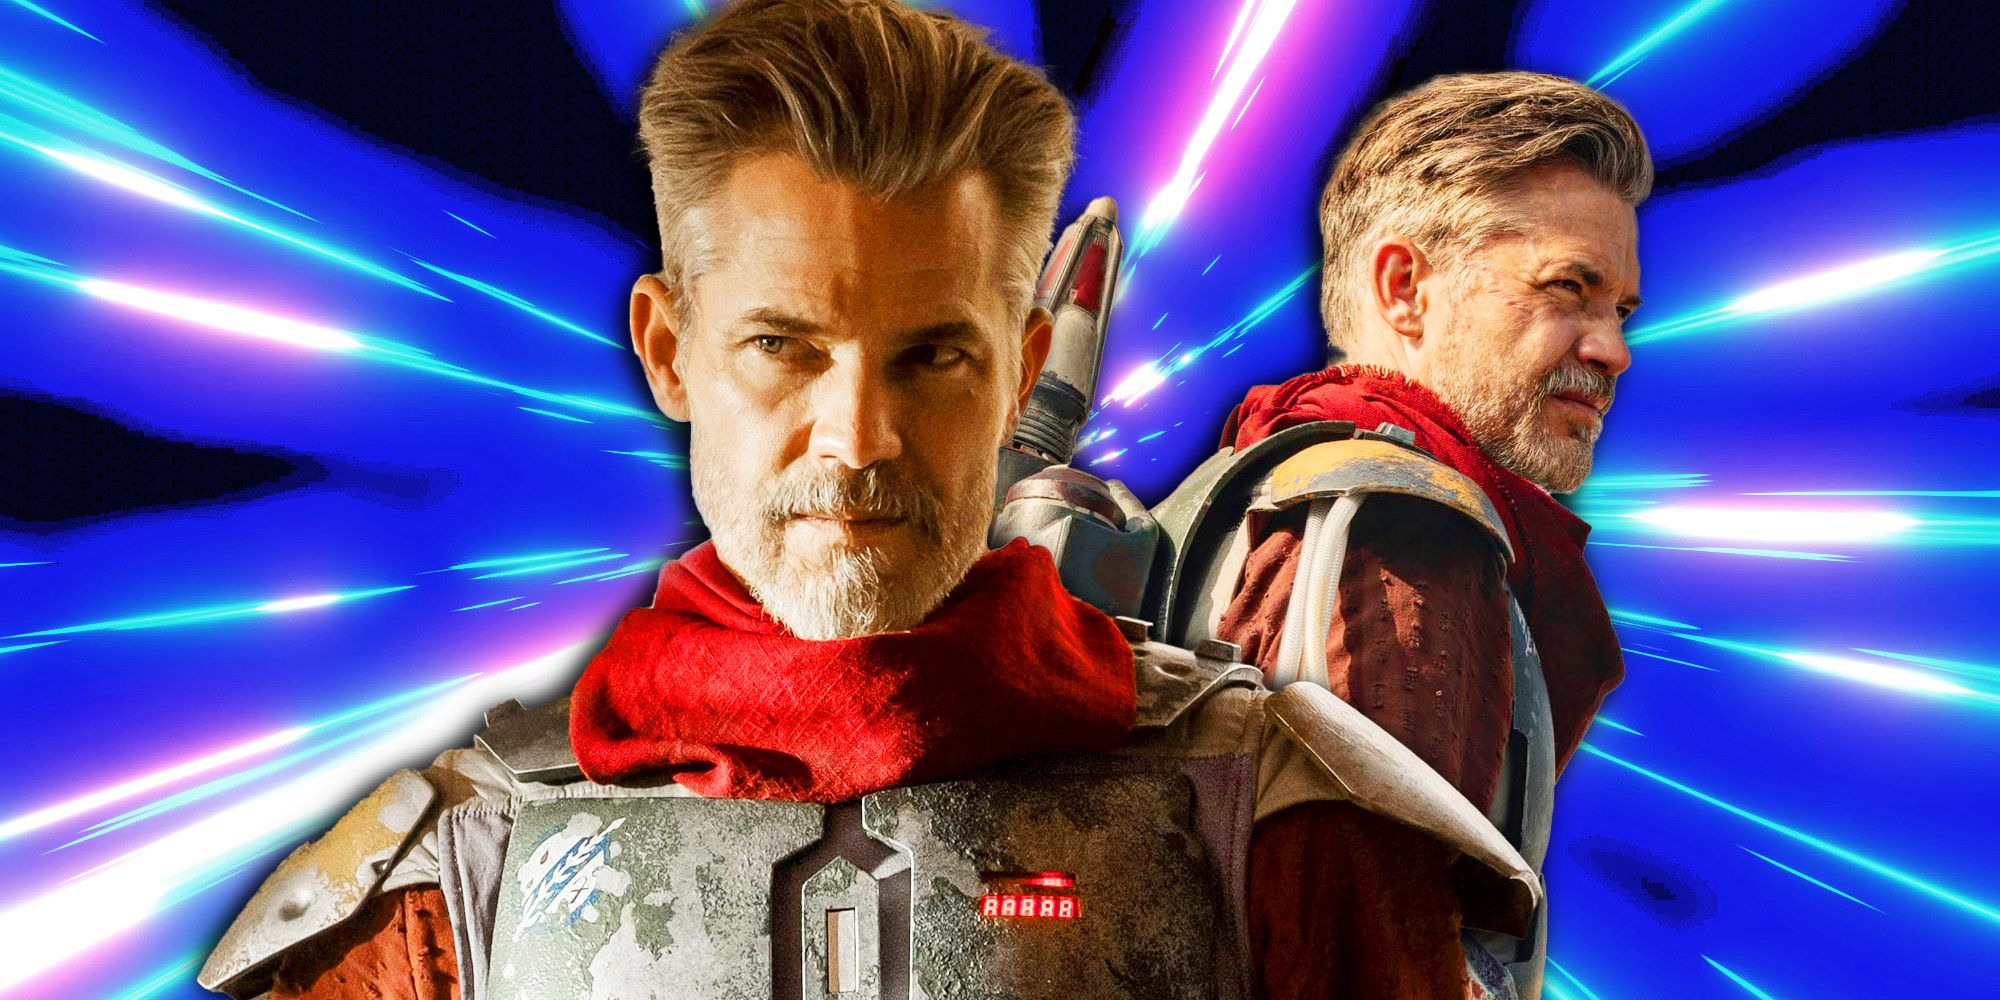 Timothy Olyphant as Cobb Vanth in The Mandalorian on a blue, hyperspace like background